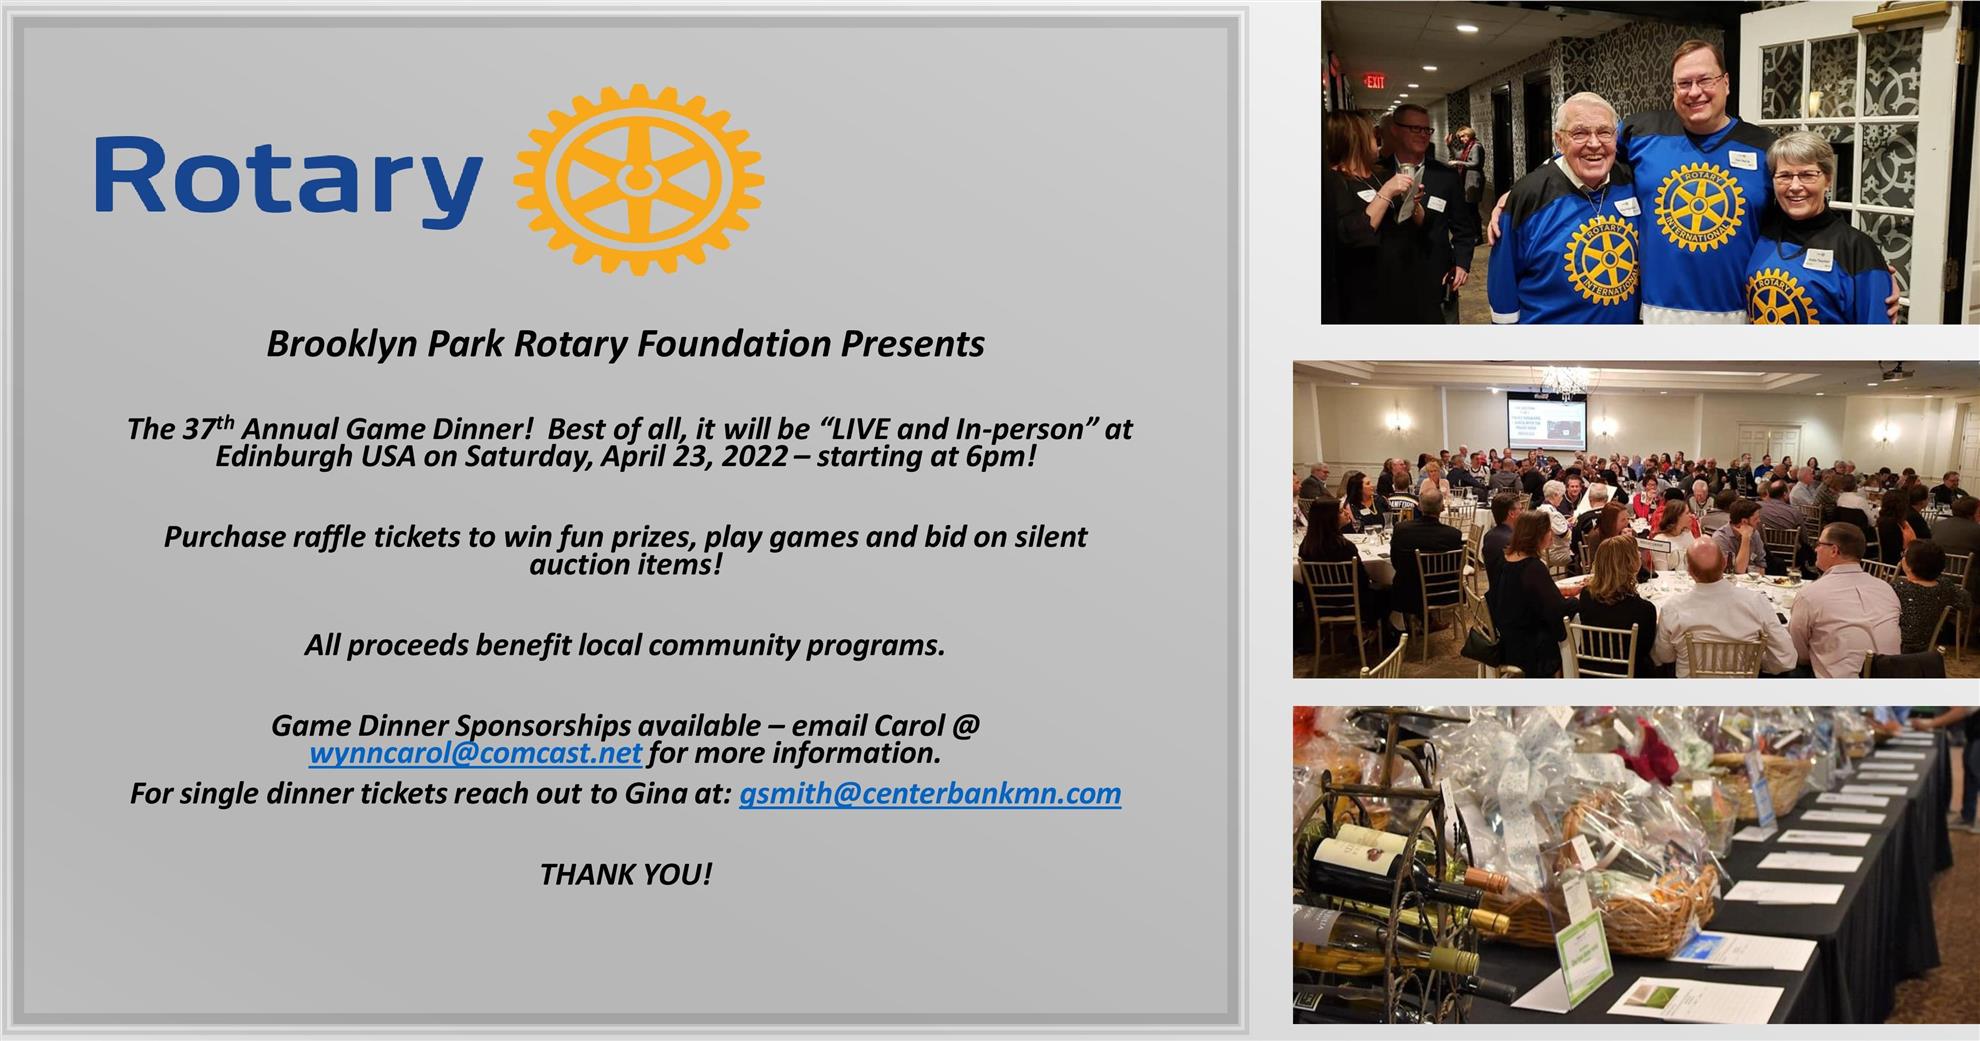 Brooklyn Park Rotary Foundation Presents: 37th Annual Game Dinner Flyer. Live and in-person at Edinburgh USA on Saturday, April 23, 2022-- starting at 6 pm! Purchase raffle tickets to win fun prizes, play game and bid on silent auction items! All proceeds benefit local community programs. Game Dinner Sponsorships available - email Carol @ wynncarol@comcast.net for more information. For single dinner tickets reach out to Gina at: gsmith@centerbankmn.com. THANK YOU!